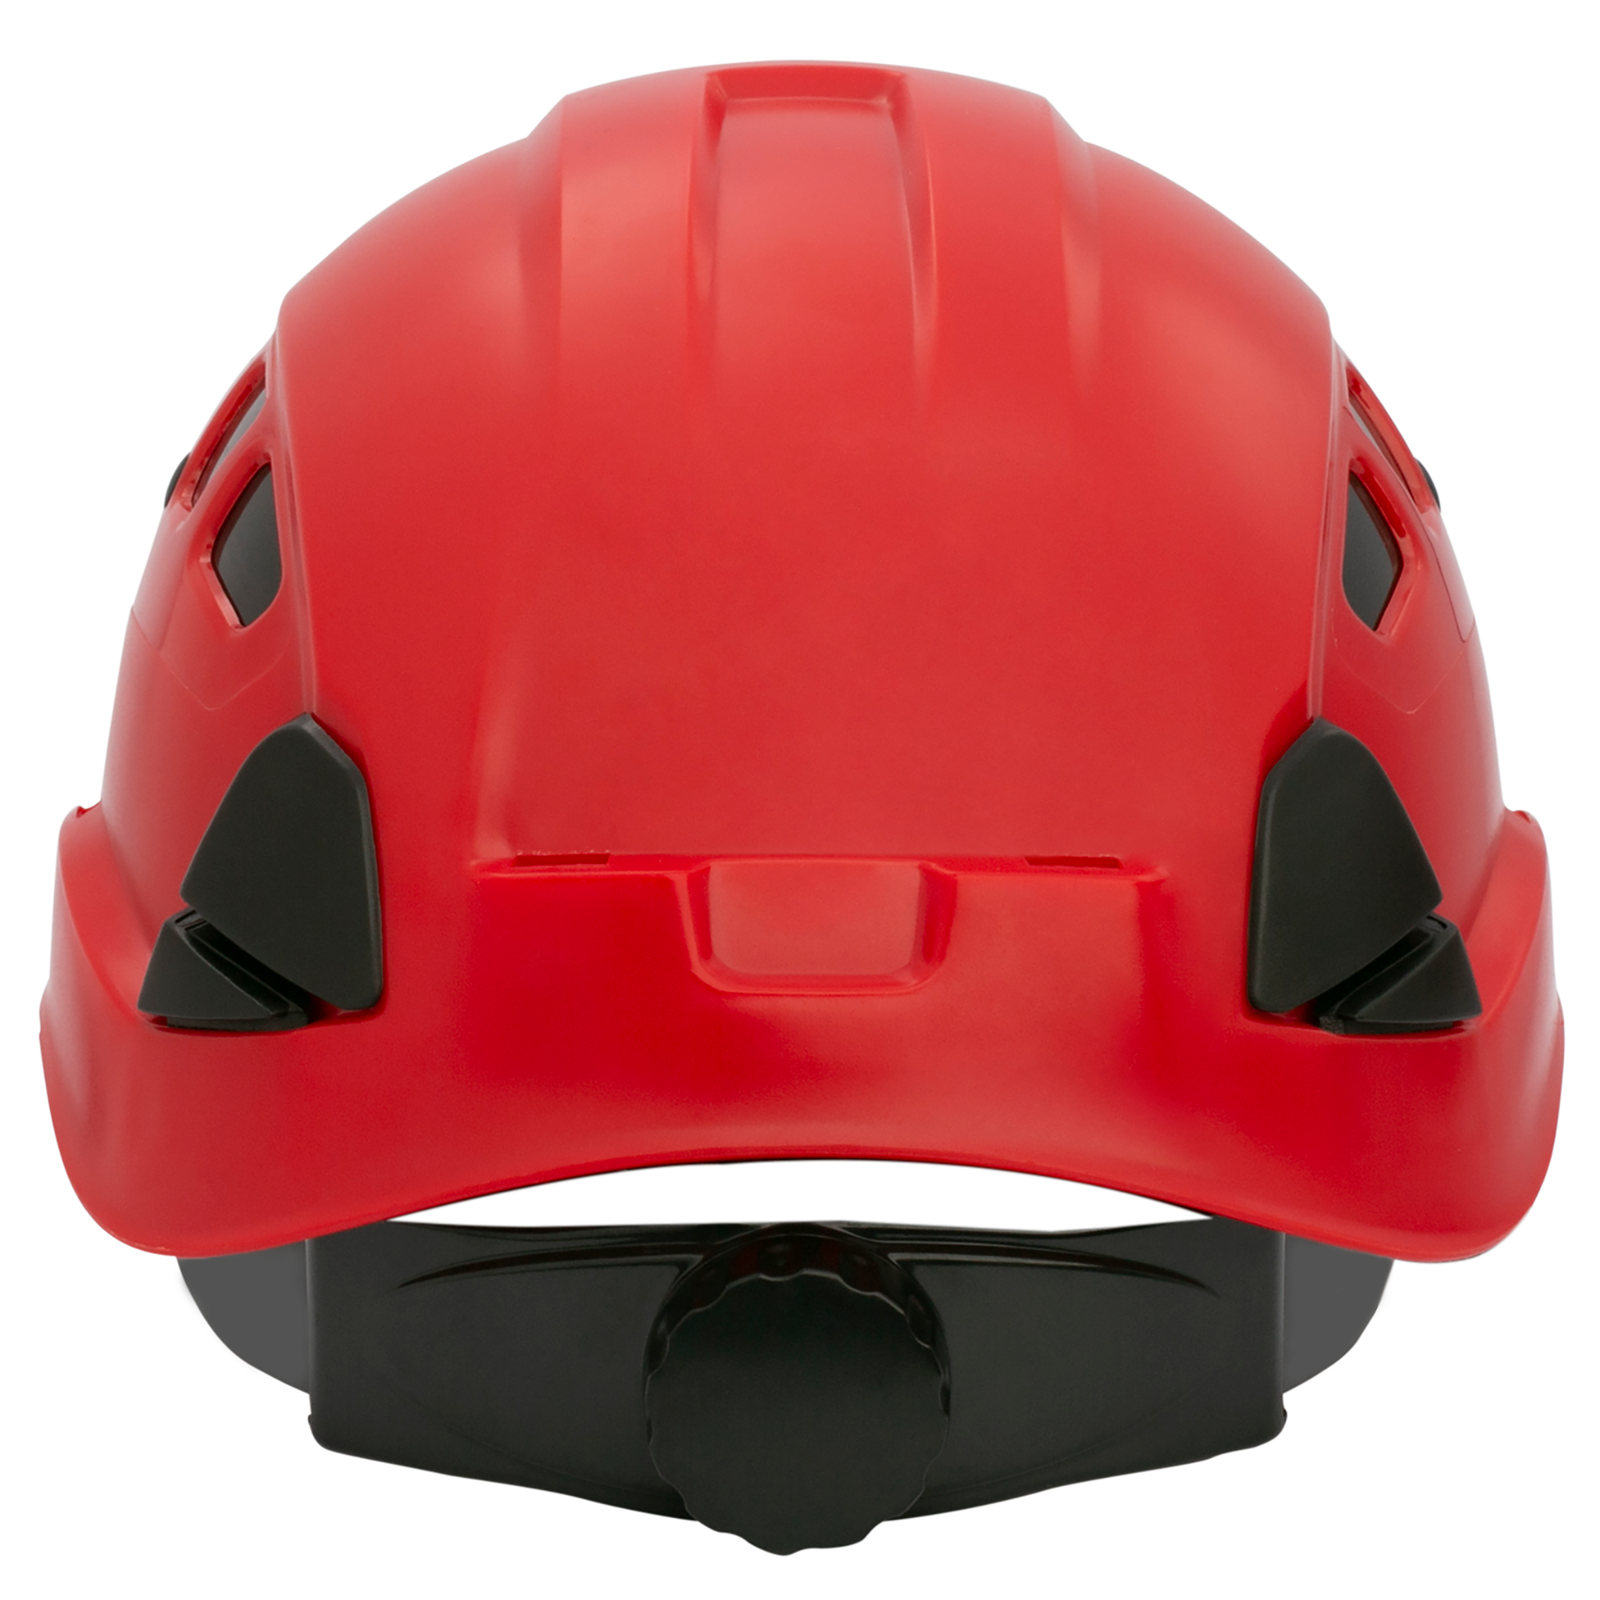 Back view of the Jorestech red ventilated hard hat with adjustable 6 point suspension and black ratchet system